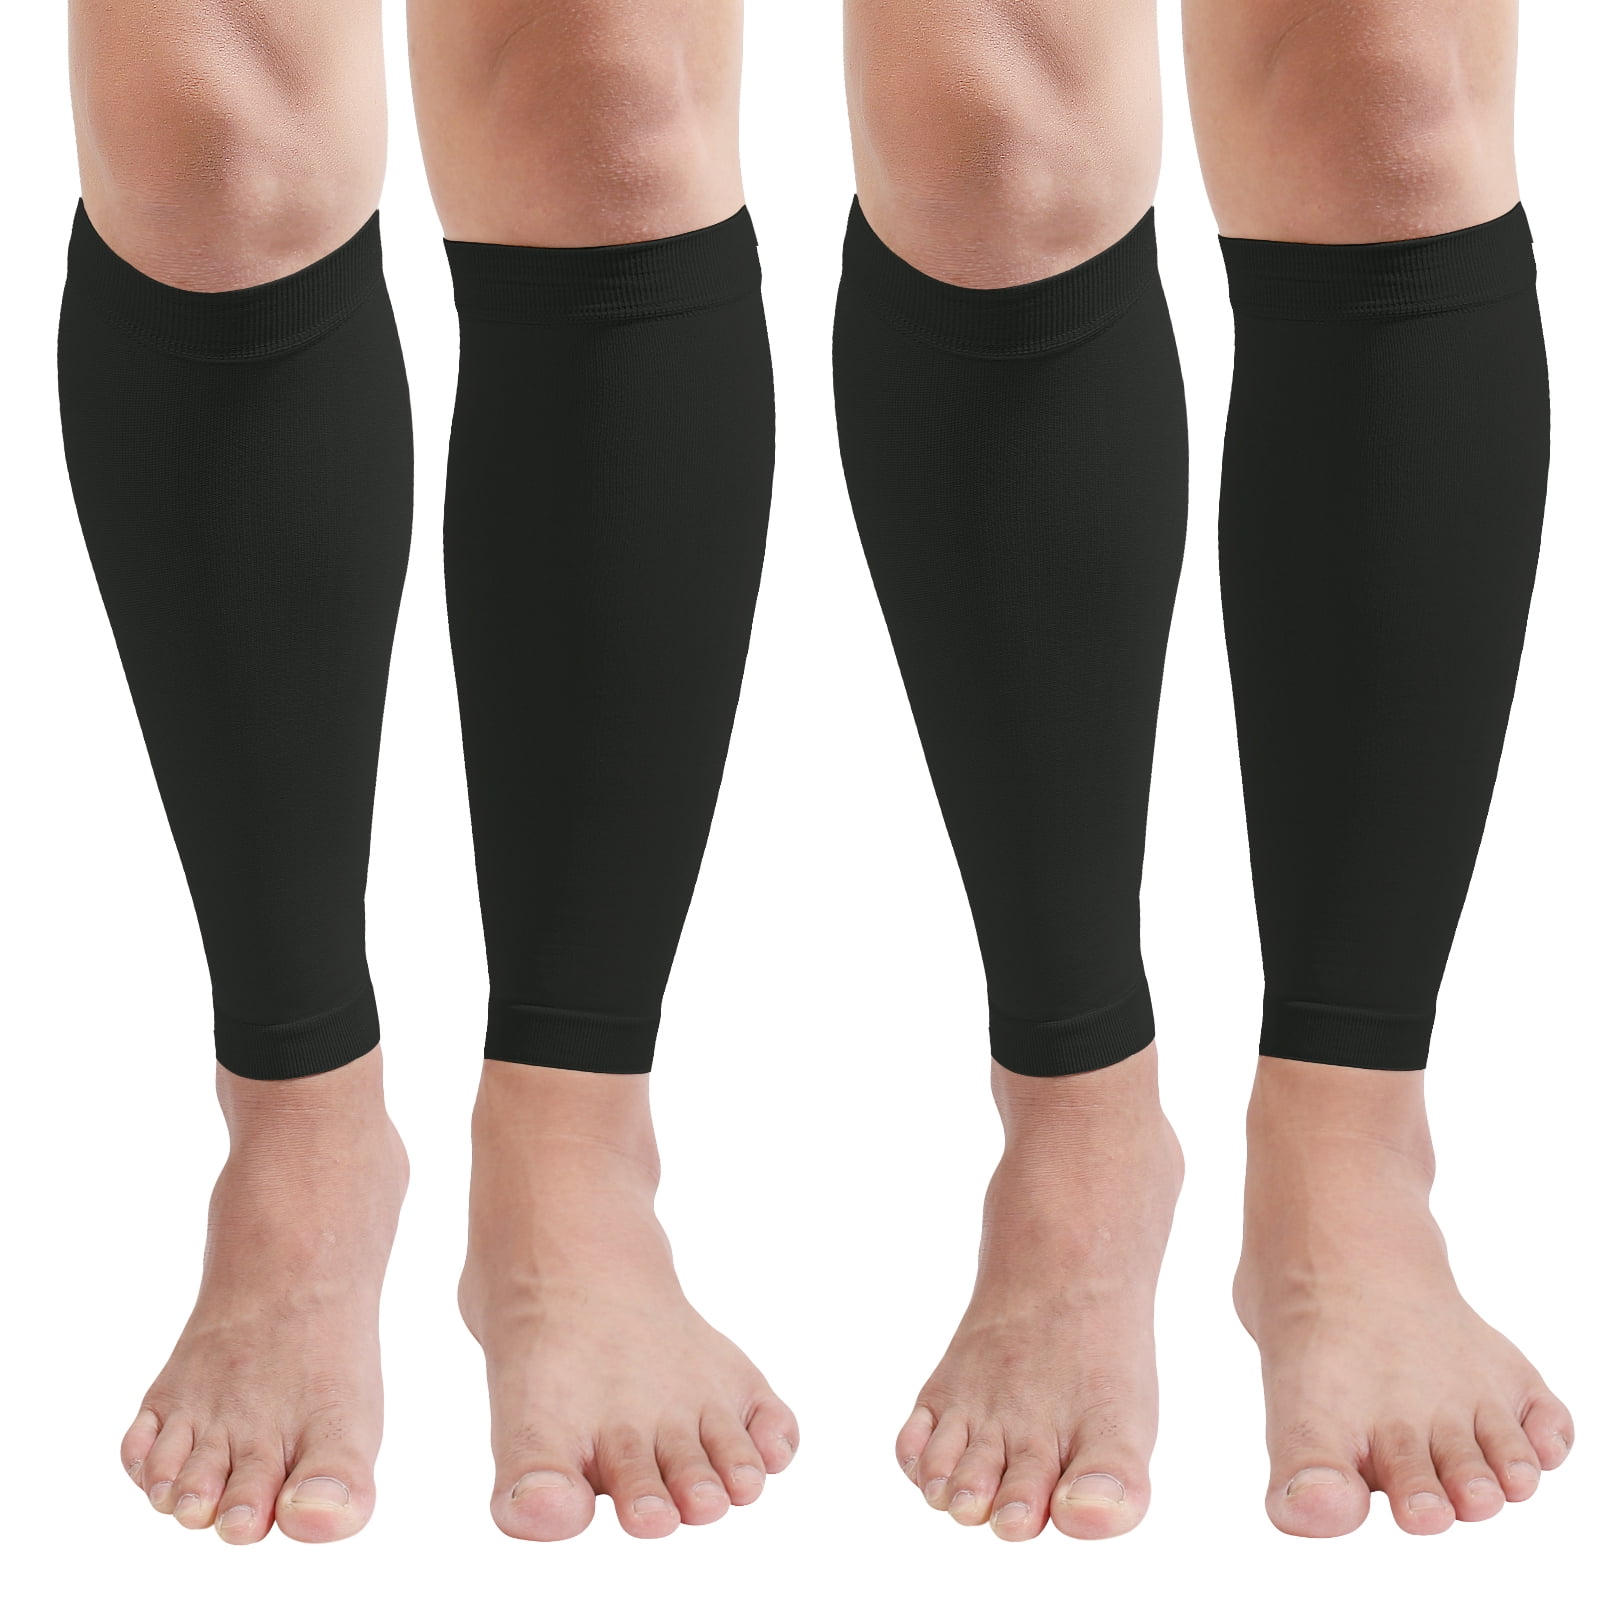 RiptGear Calf Compression Sleeves for Women and Men – Graduated